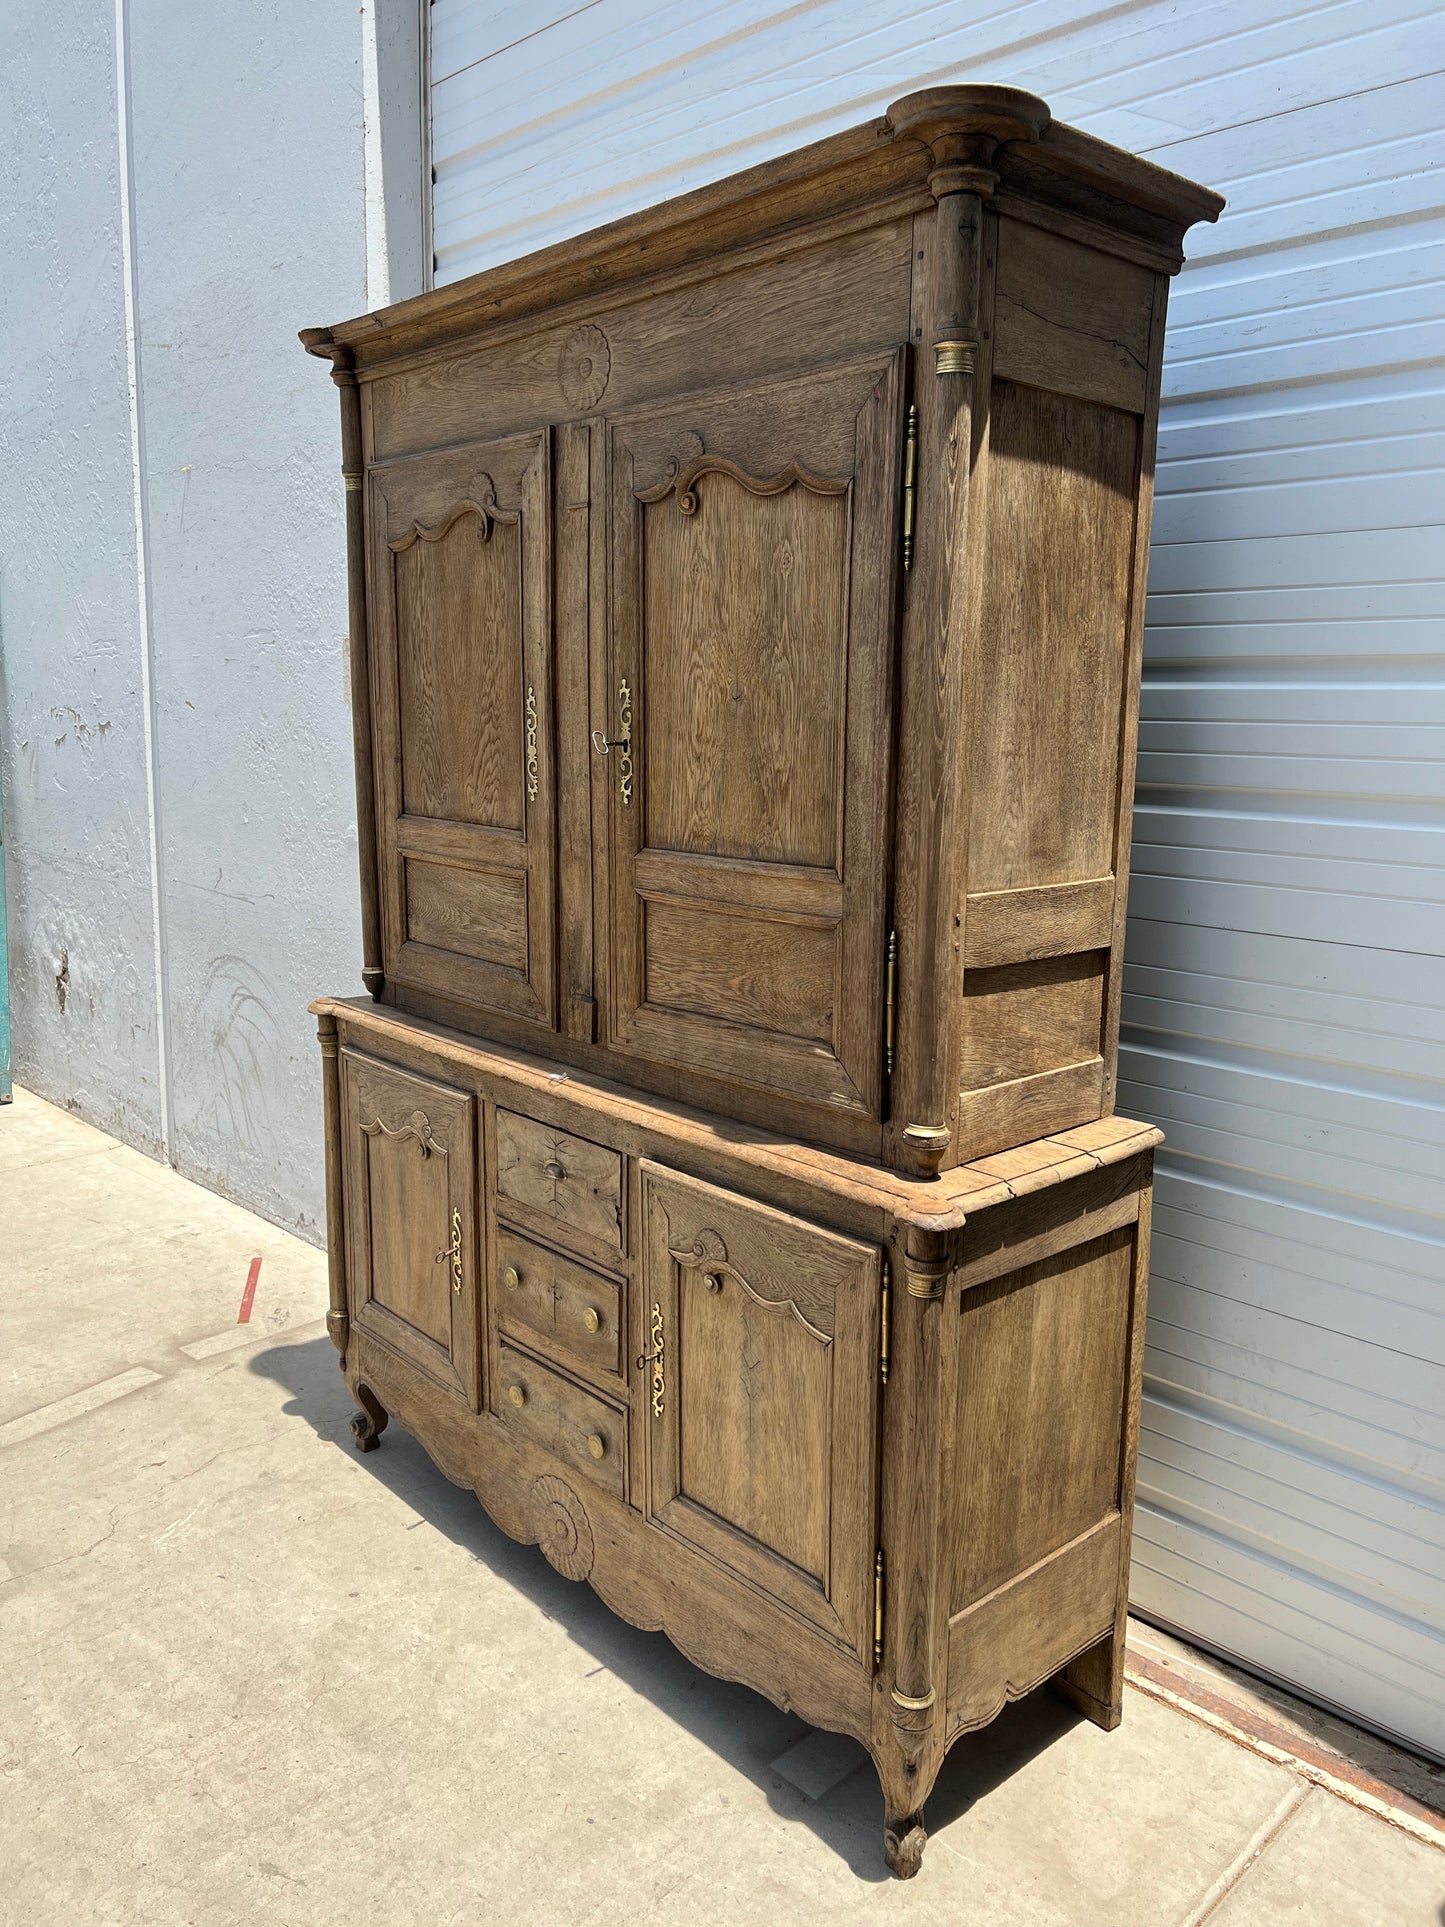 French Antique Cabinet / Hutch, c.1850 Lorraine Region of France